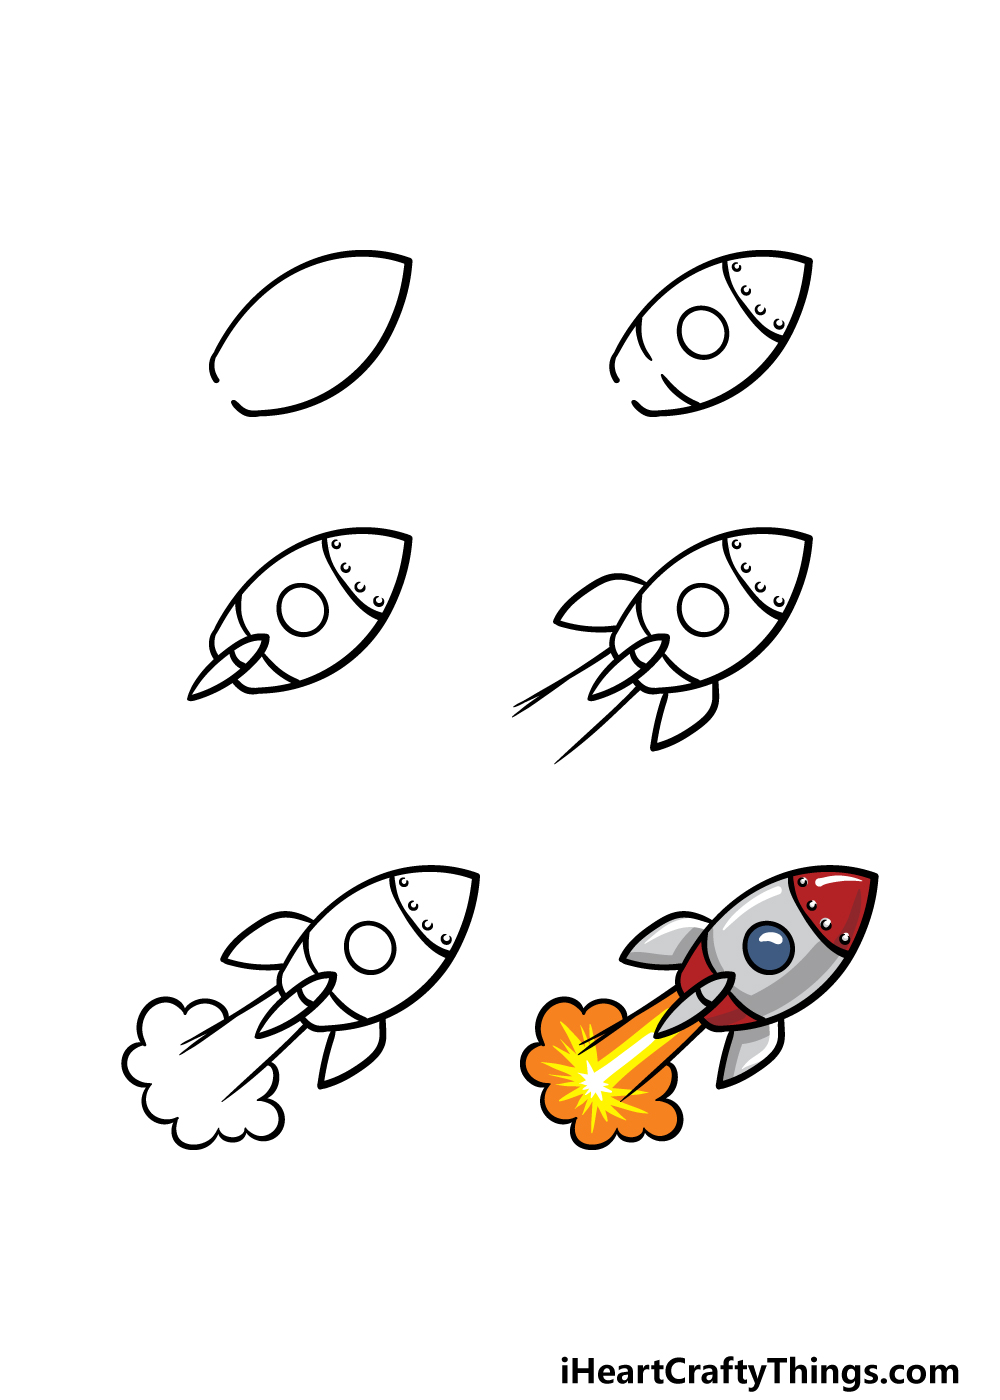 how to draw a cartoon spaceship in 6 steps